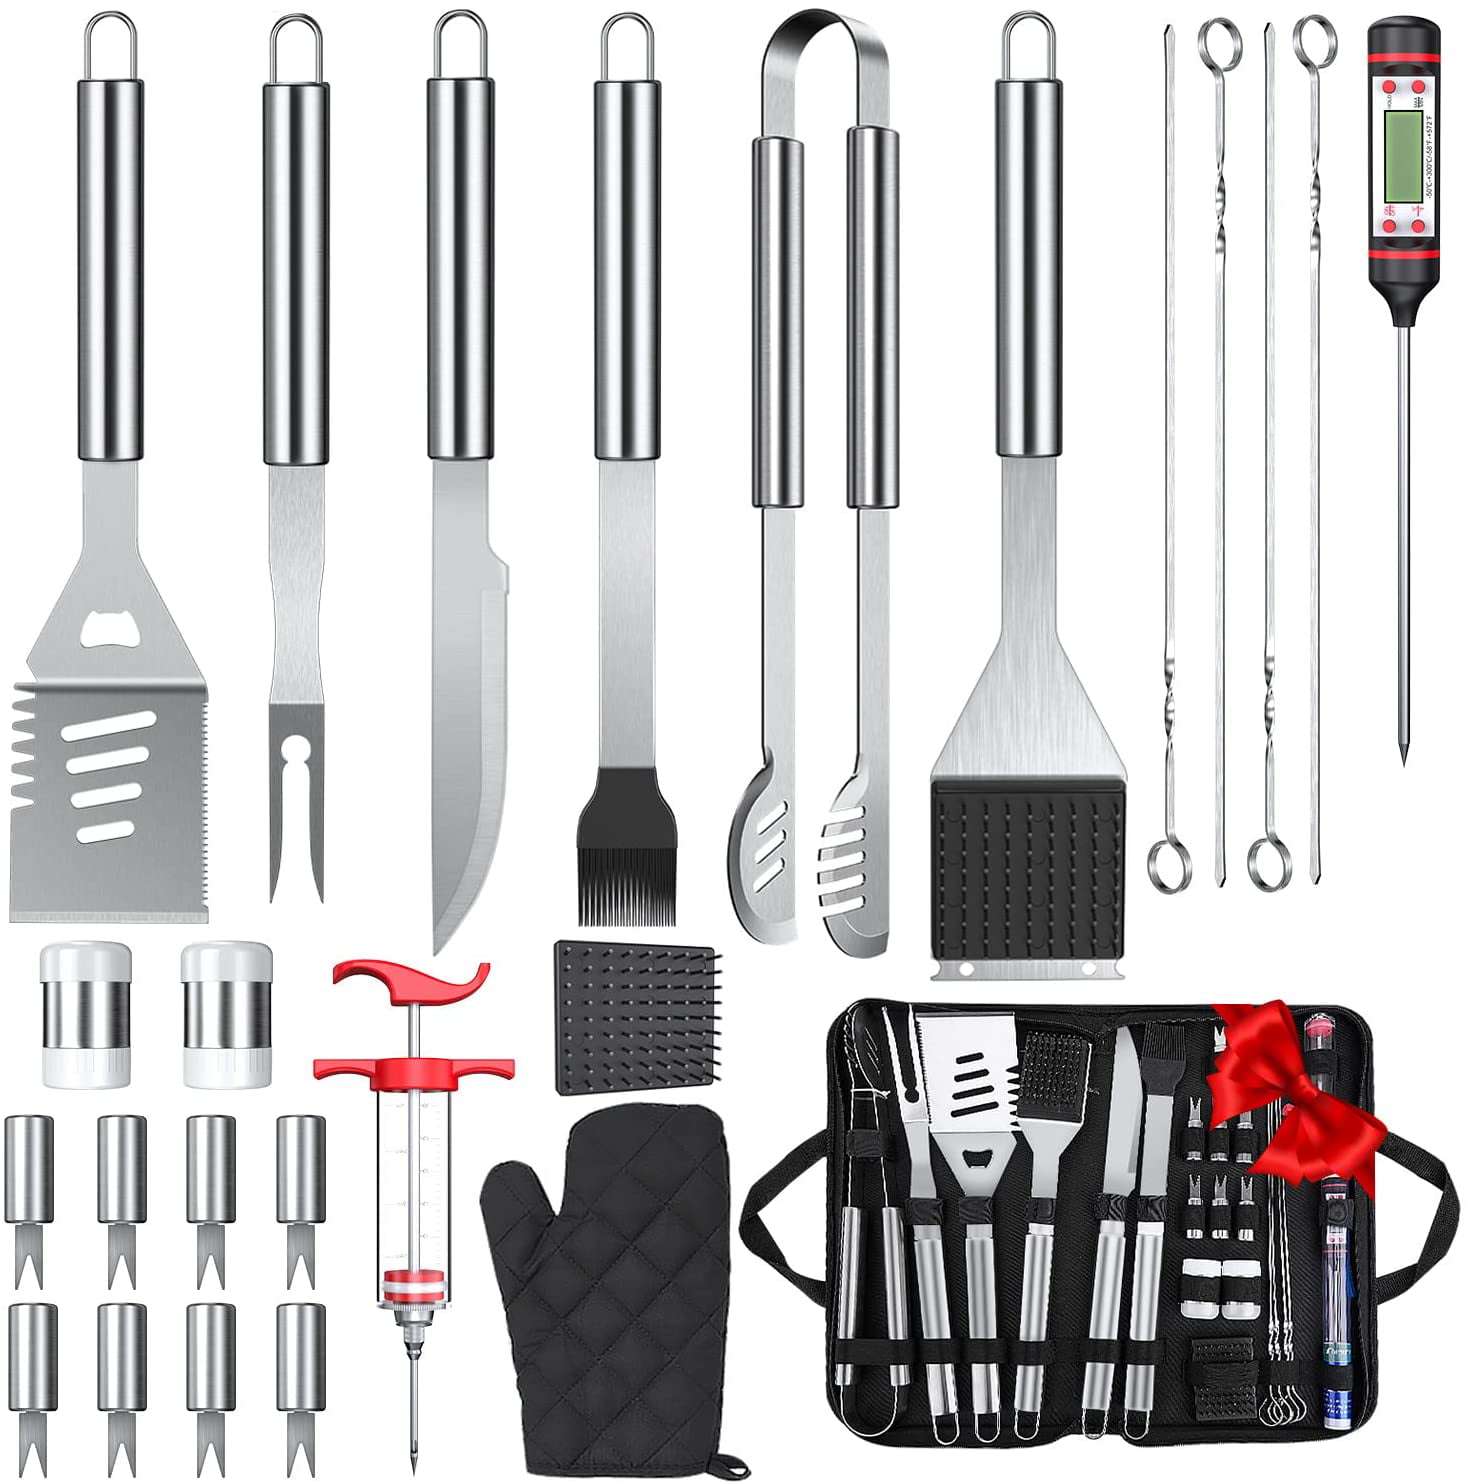 BBQ Grilling Accessories 25PCS Stainless Steel Grilling Kit Grill Tools Set 